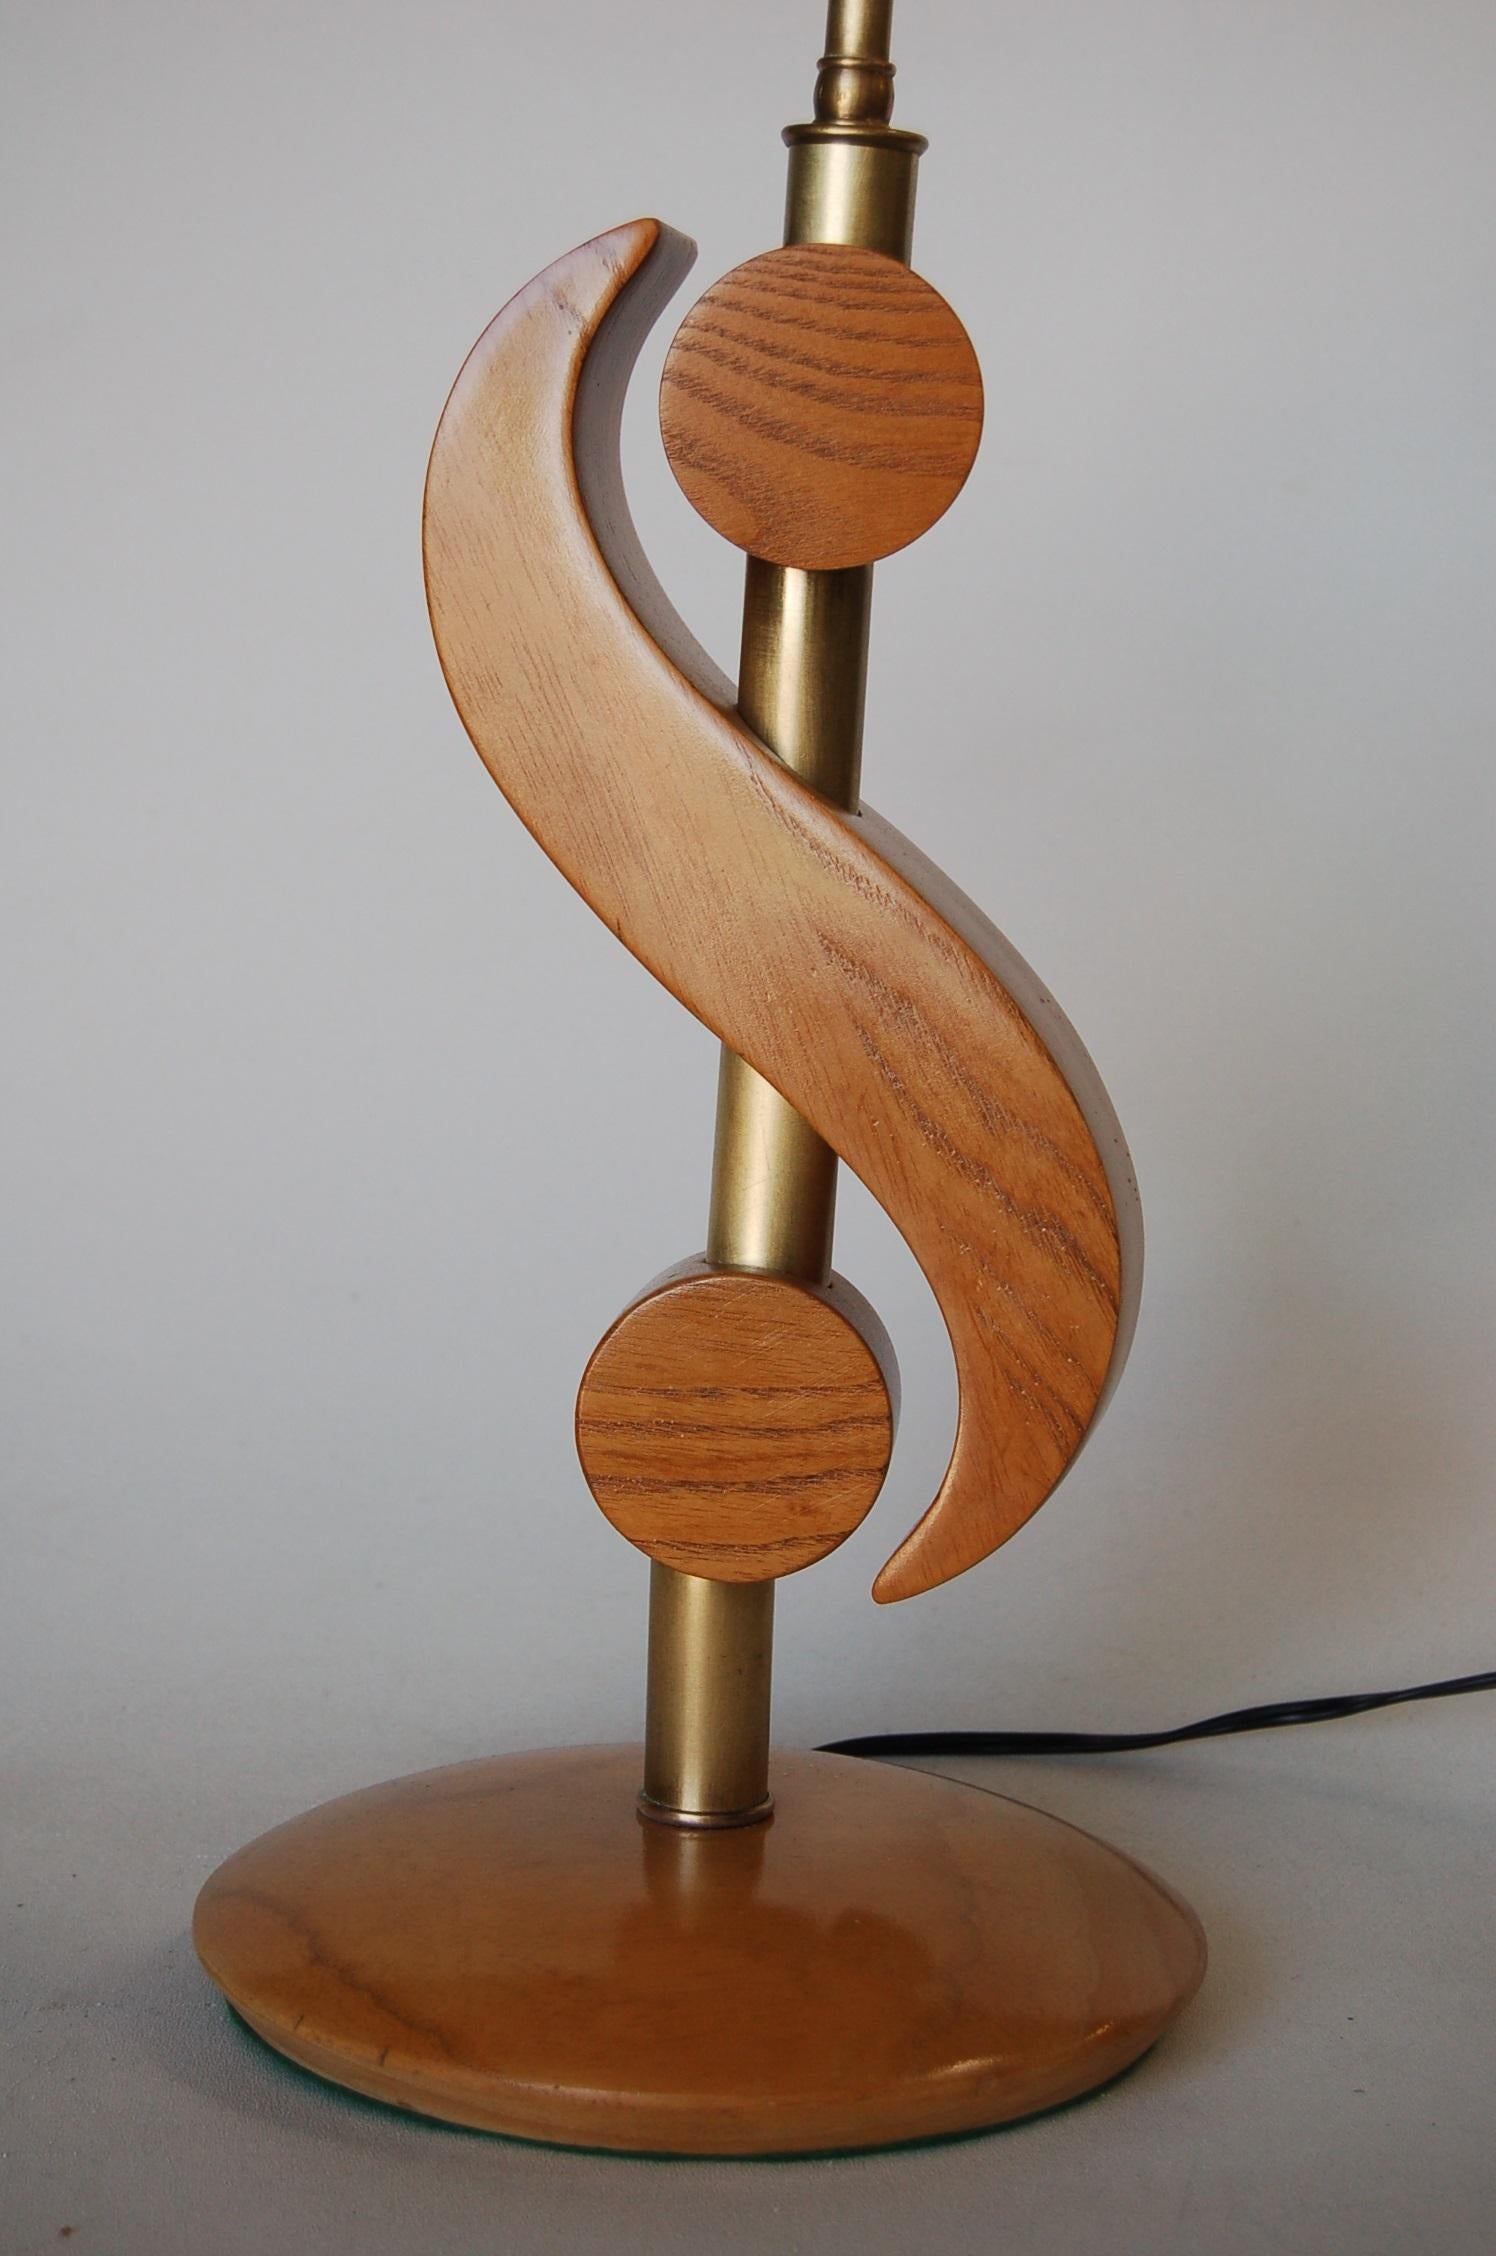 American Carved Oak and Brass Biomorphic Modernist Table Lamp, Pair For Sale